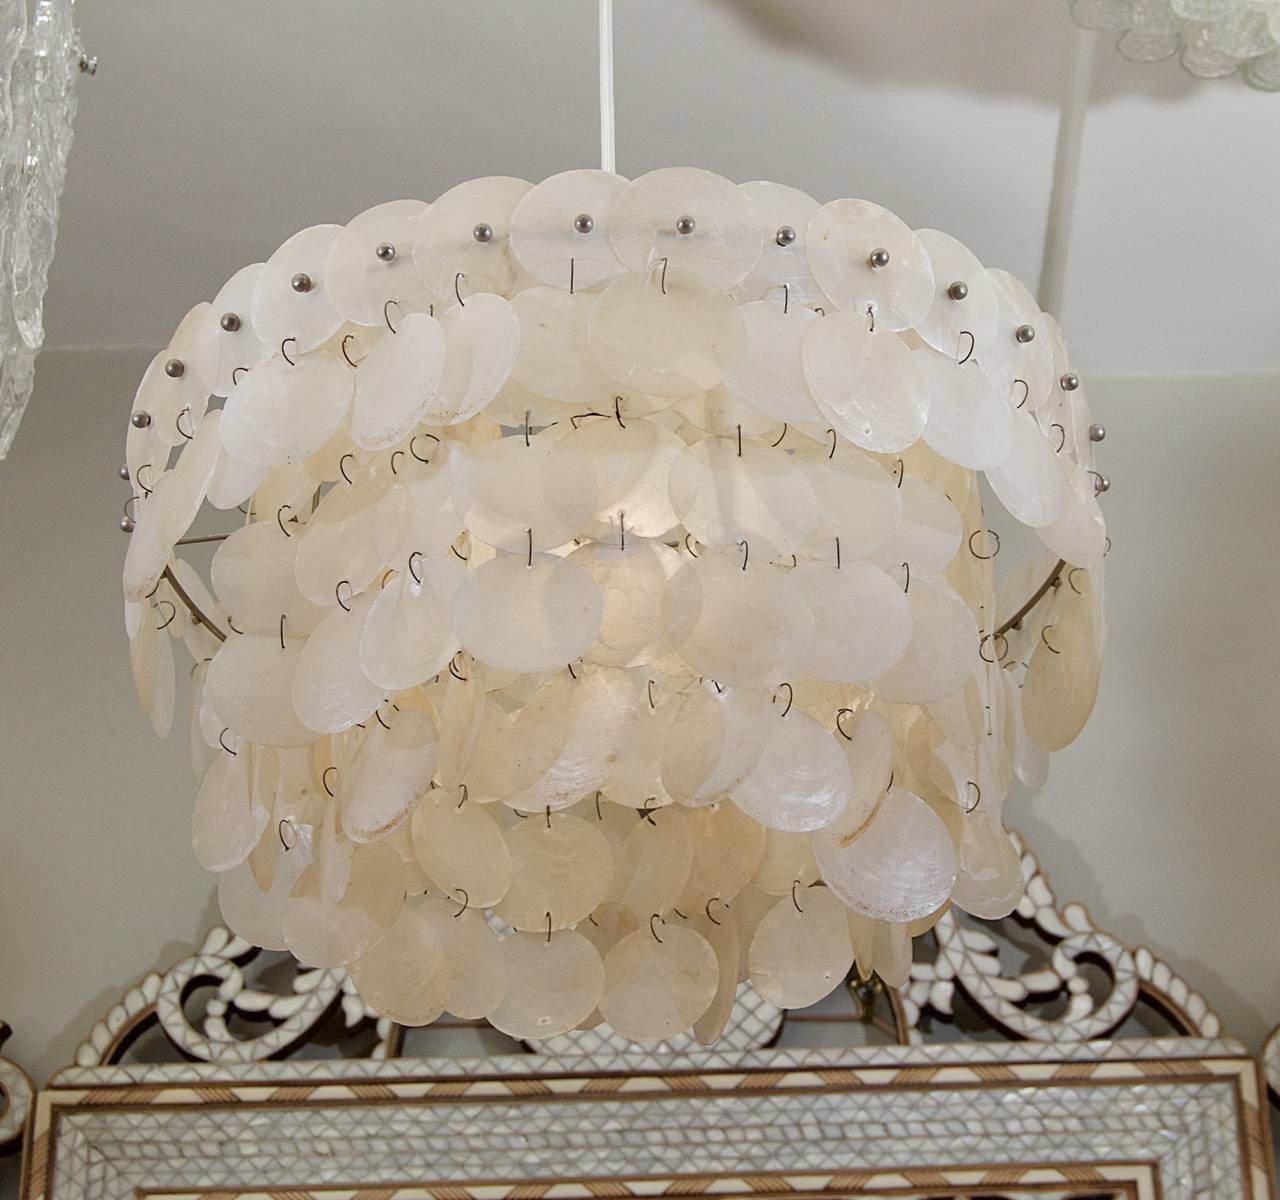 Fabulous capiz chandelier, composed of three rings of square profile stainless steel and strands of capiz shell discs. The capiz provides a particularly warm, diffused lighting effect.
 
Takes one medium based bulb up to 75 watts, new wiring.